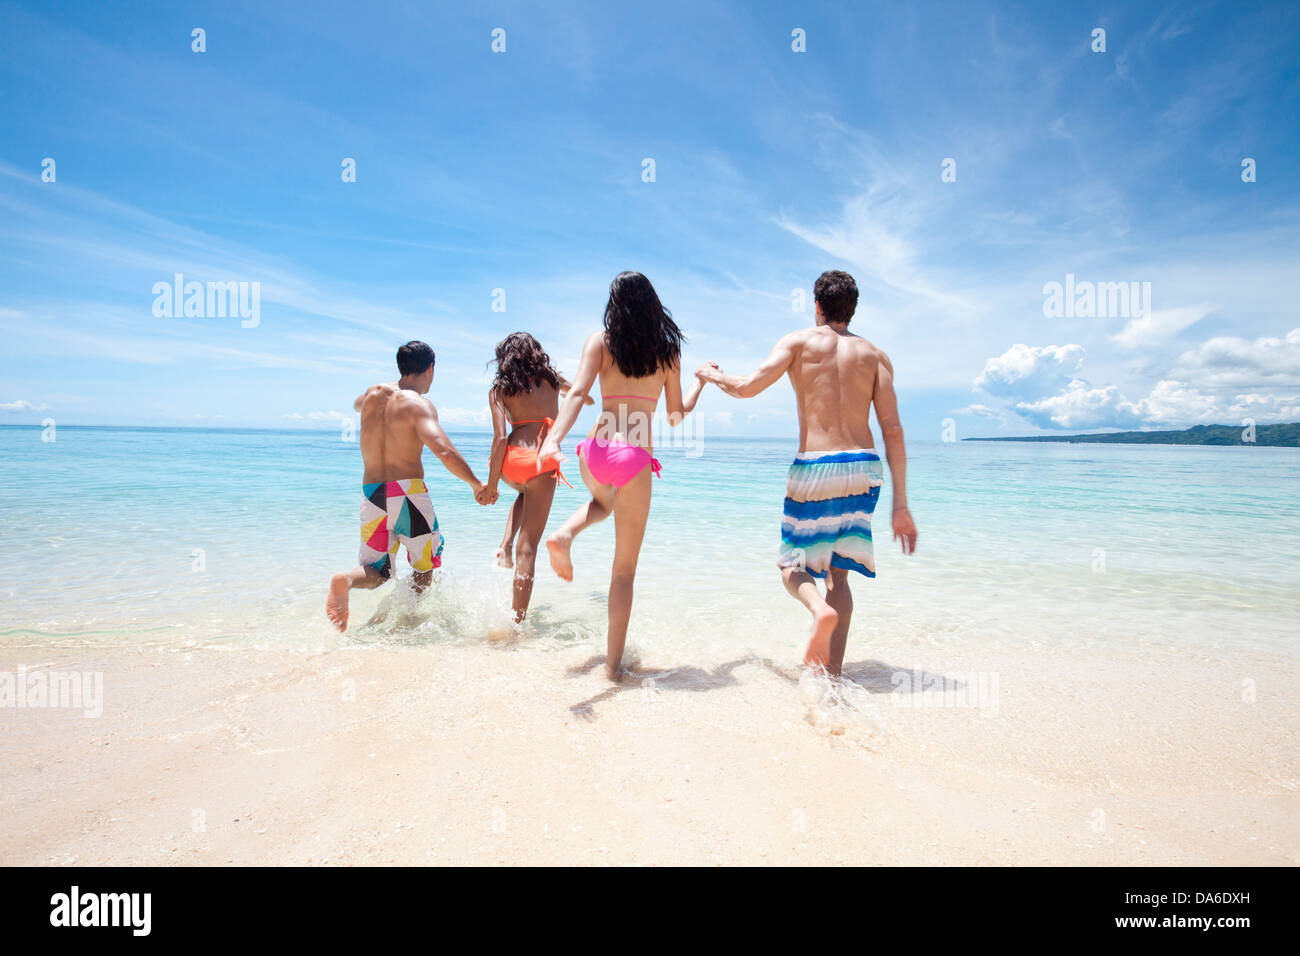 Friends playing on the beach. Stock Photo